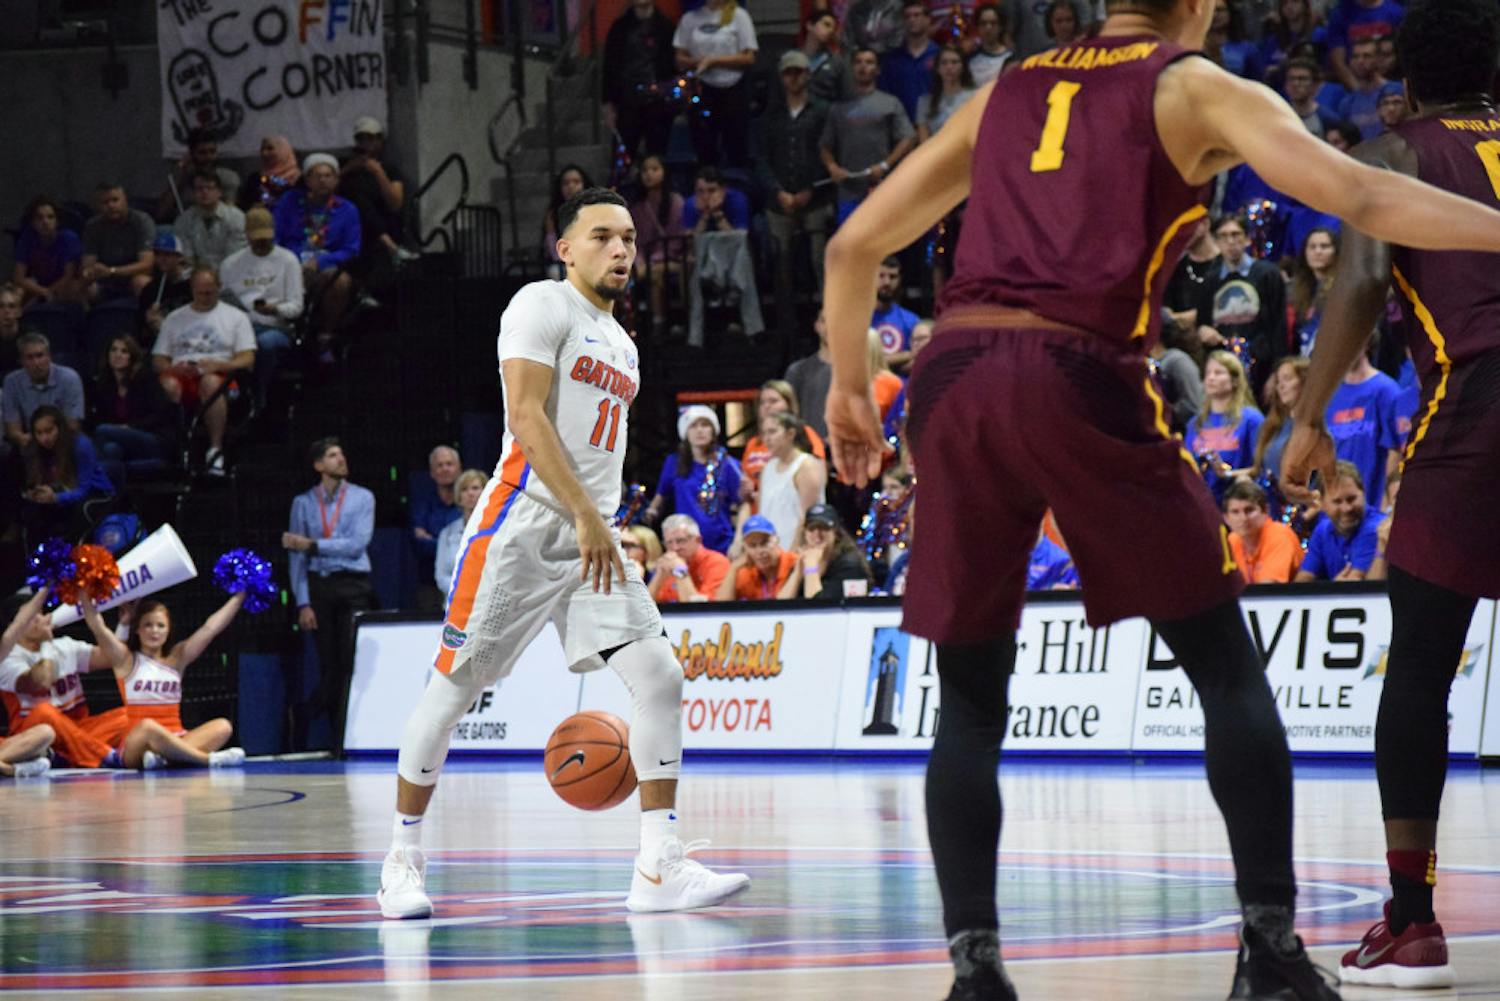 Florida guard Chris Chiozza scored 15 points on Saturday in Florida's 66-60 win over Cincinnati at the Prudential Center in Newark, New Jersey.